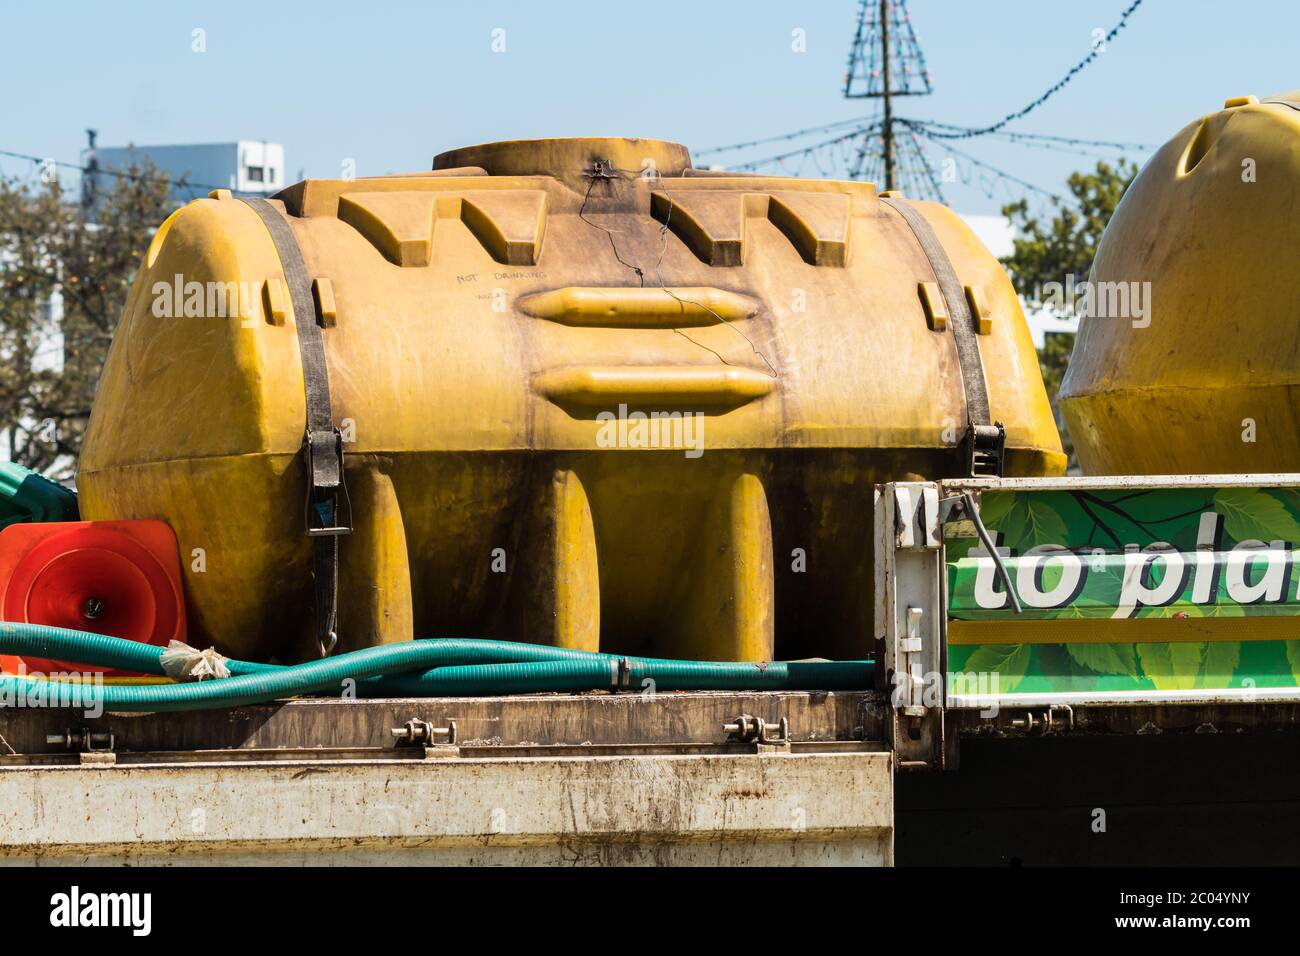 water bowser or tank delivering non potable water for garden irrigation during drought conditions in South Africa Stock Photo